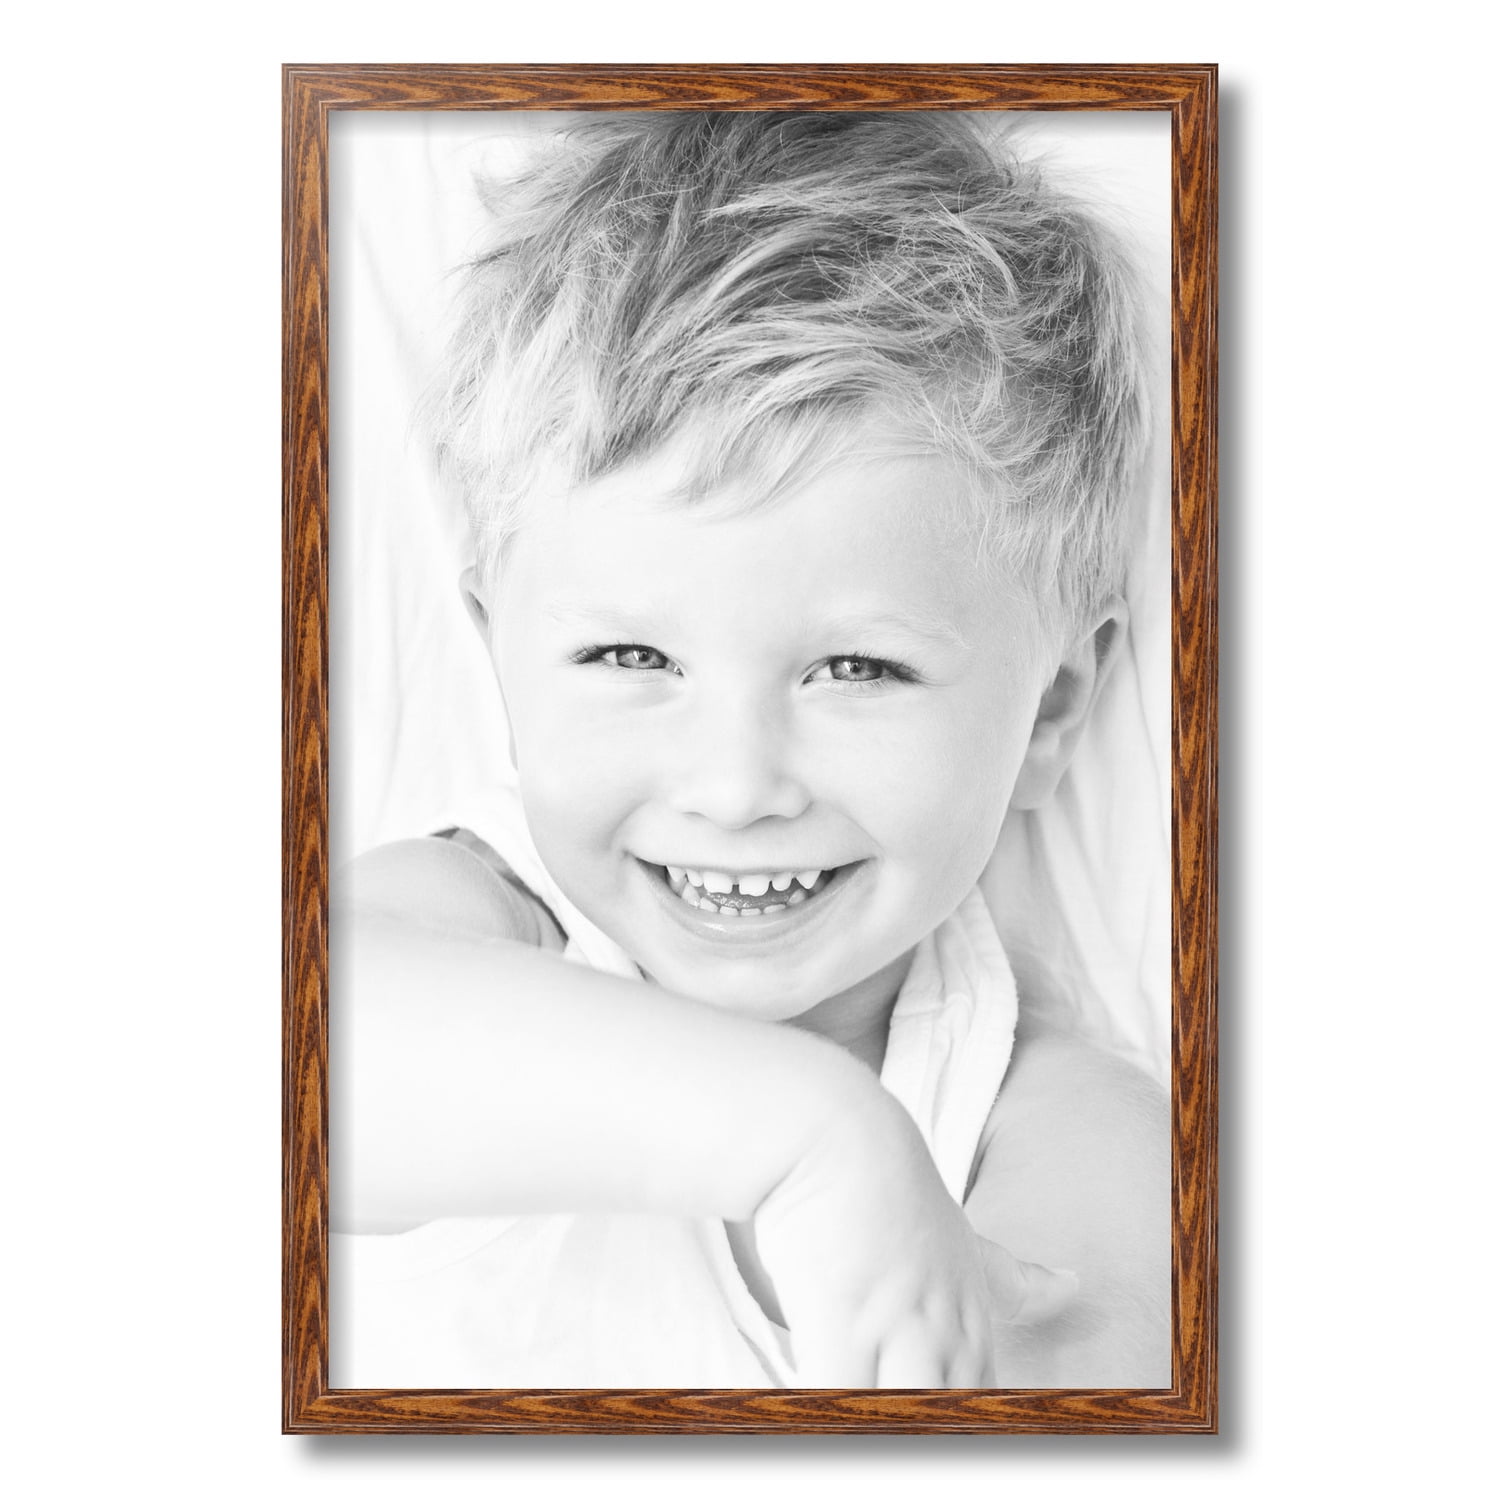 Gold 16x24 Picture Frames 16x24 Photo 16 x 24 Poster F